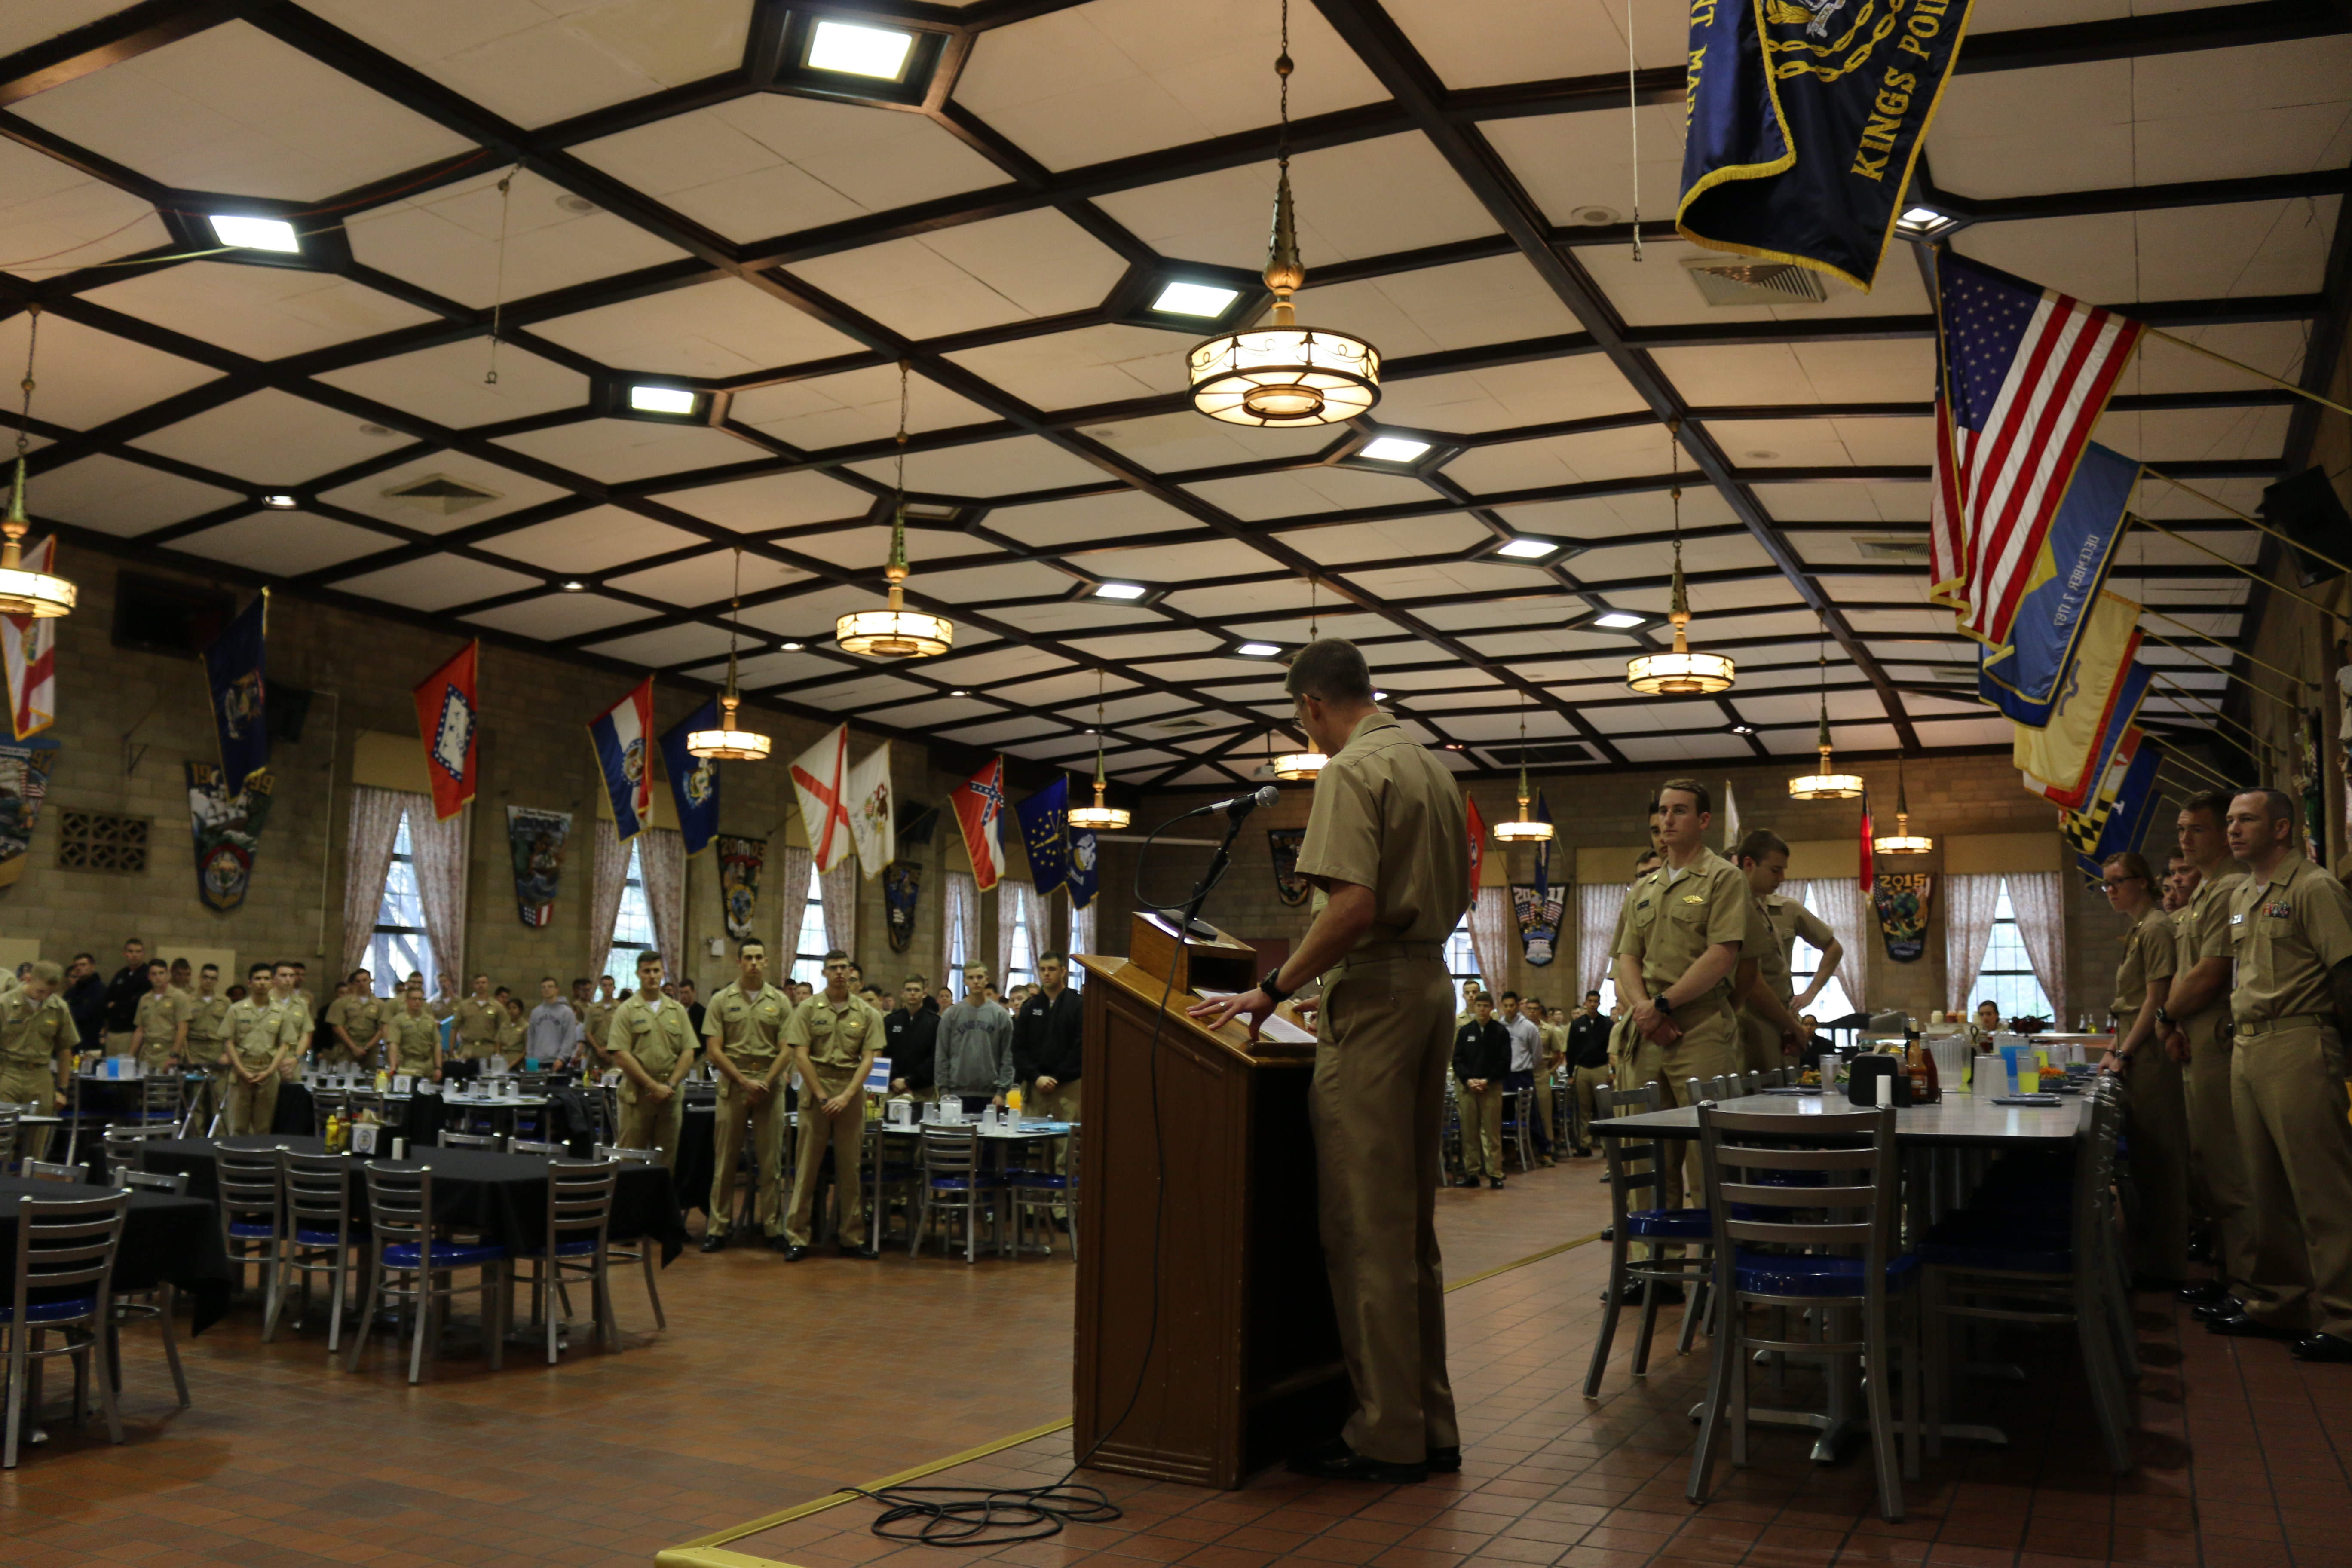 LCDR Ingram receives a warm welcome from the Regiment of Midshipmen